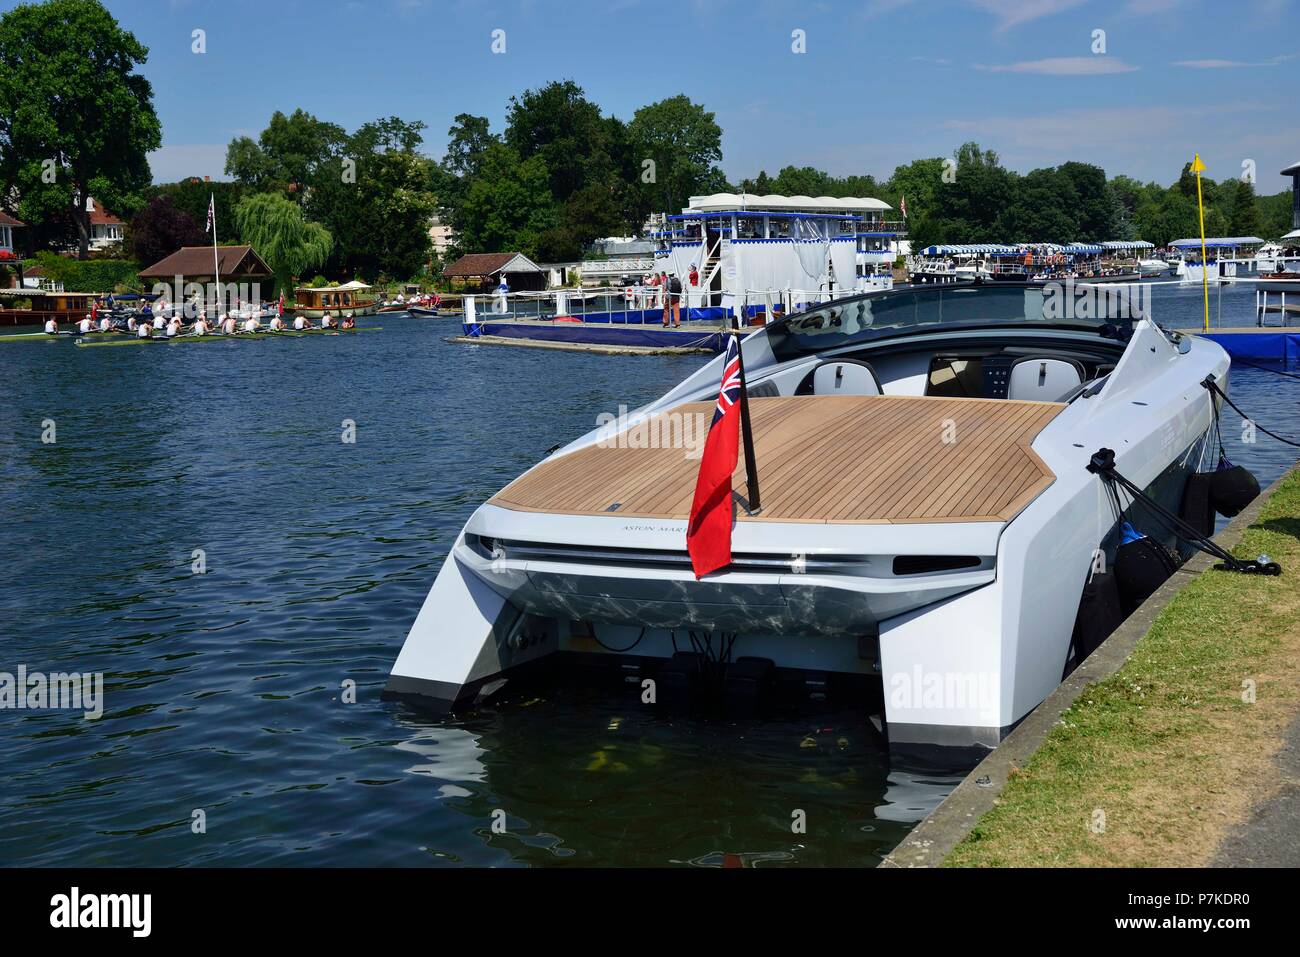 Henley Royal Regatta, Henley-on-Thames, UK. 6th July 2018. Henley Royal Regatta has for the first time in its 178 year history partnered with four prestigious British brands one of whom is Aston Martin who are showing several of their luxury cars together with this AM37 power boat.  This version is priced at £1.4M Credit Wendy Johnson/Alamy Live News Stock Photo